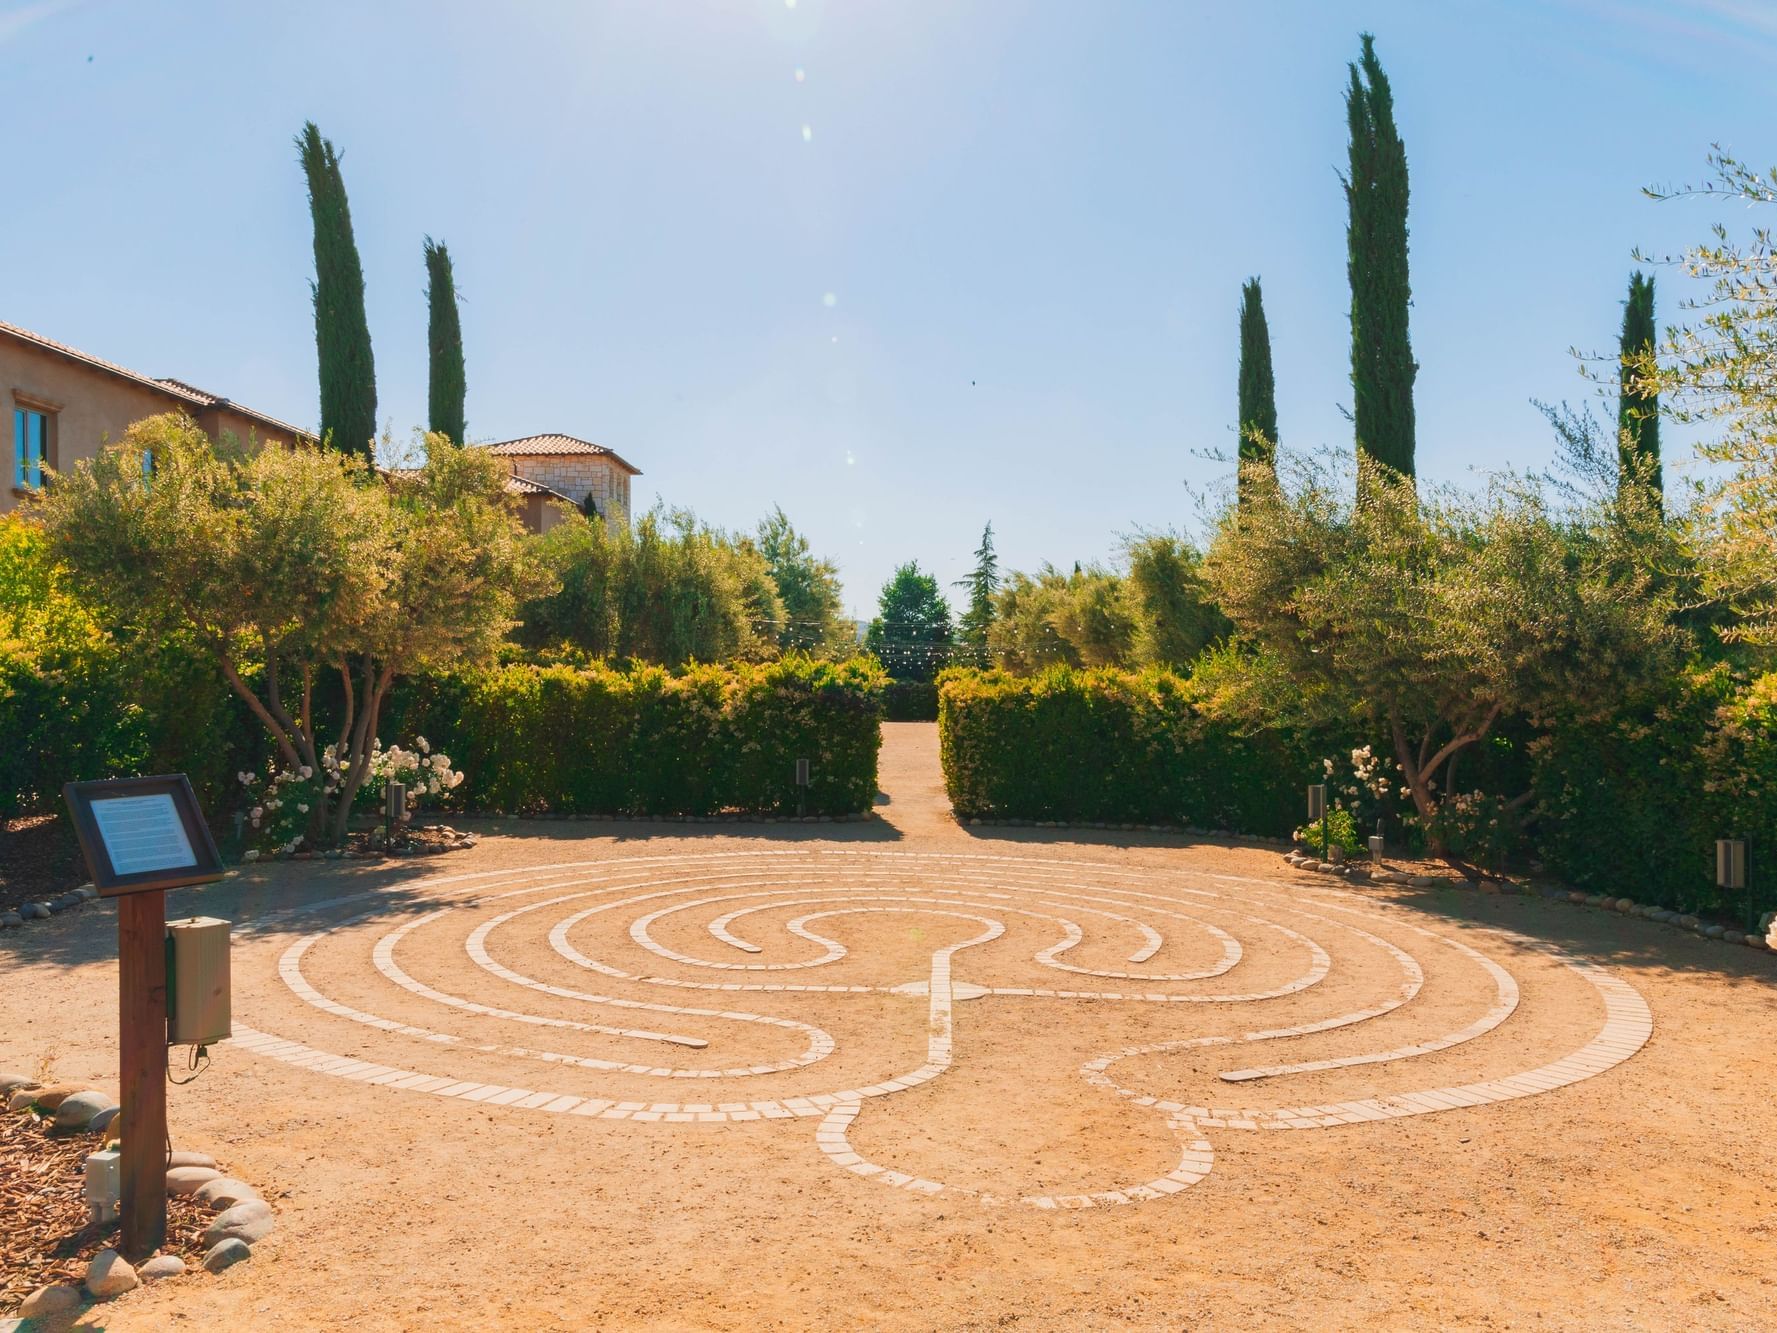 Sonic labyrinth with stone path